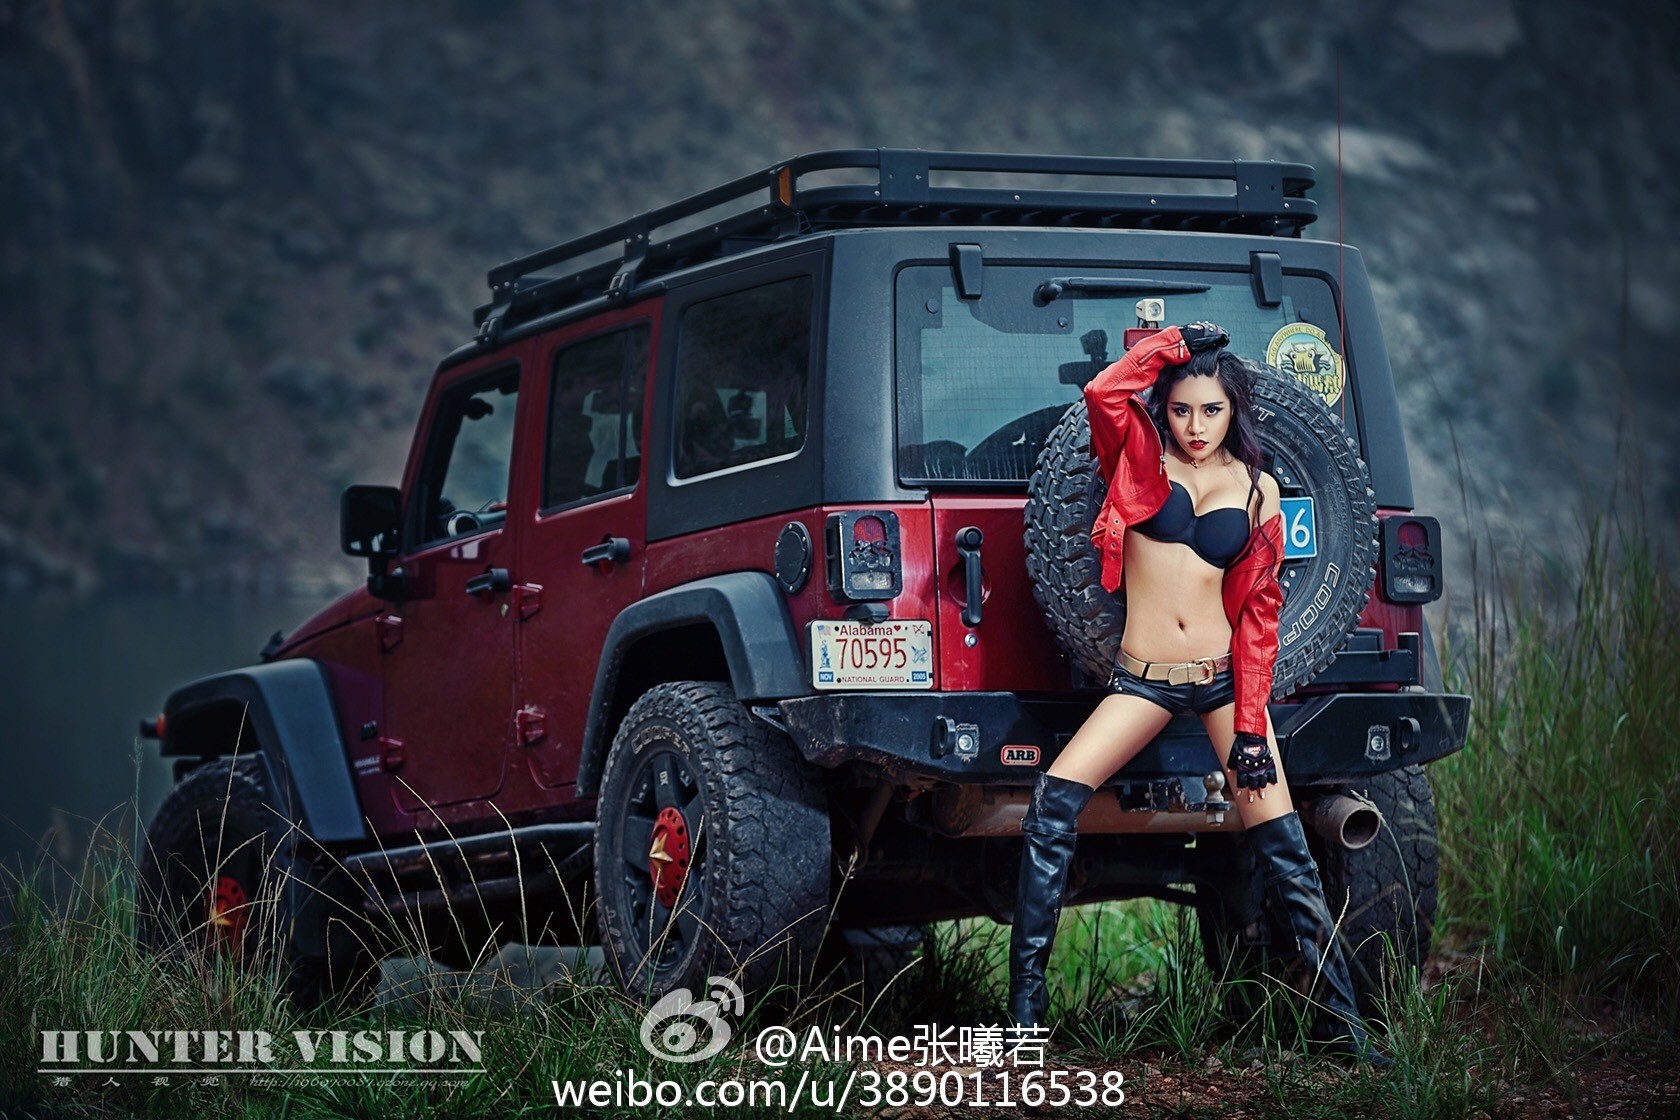 jeep-wrangler-with-chinese-communist-star-and-sexy-model-is-weird-photo-gallery_9